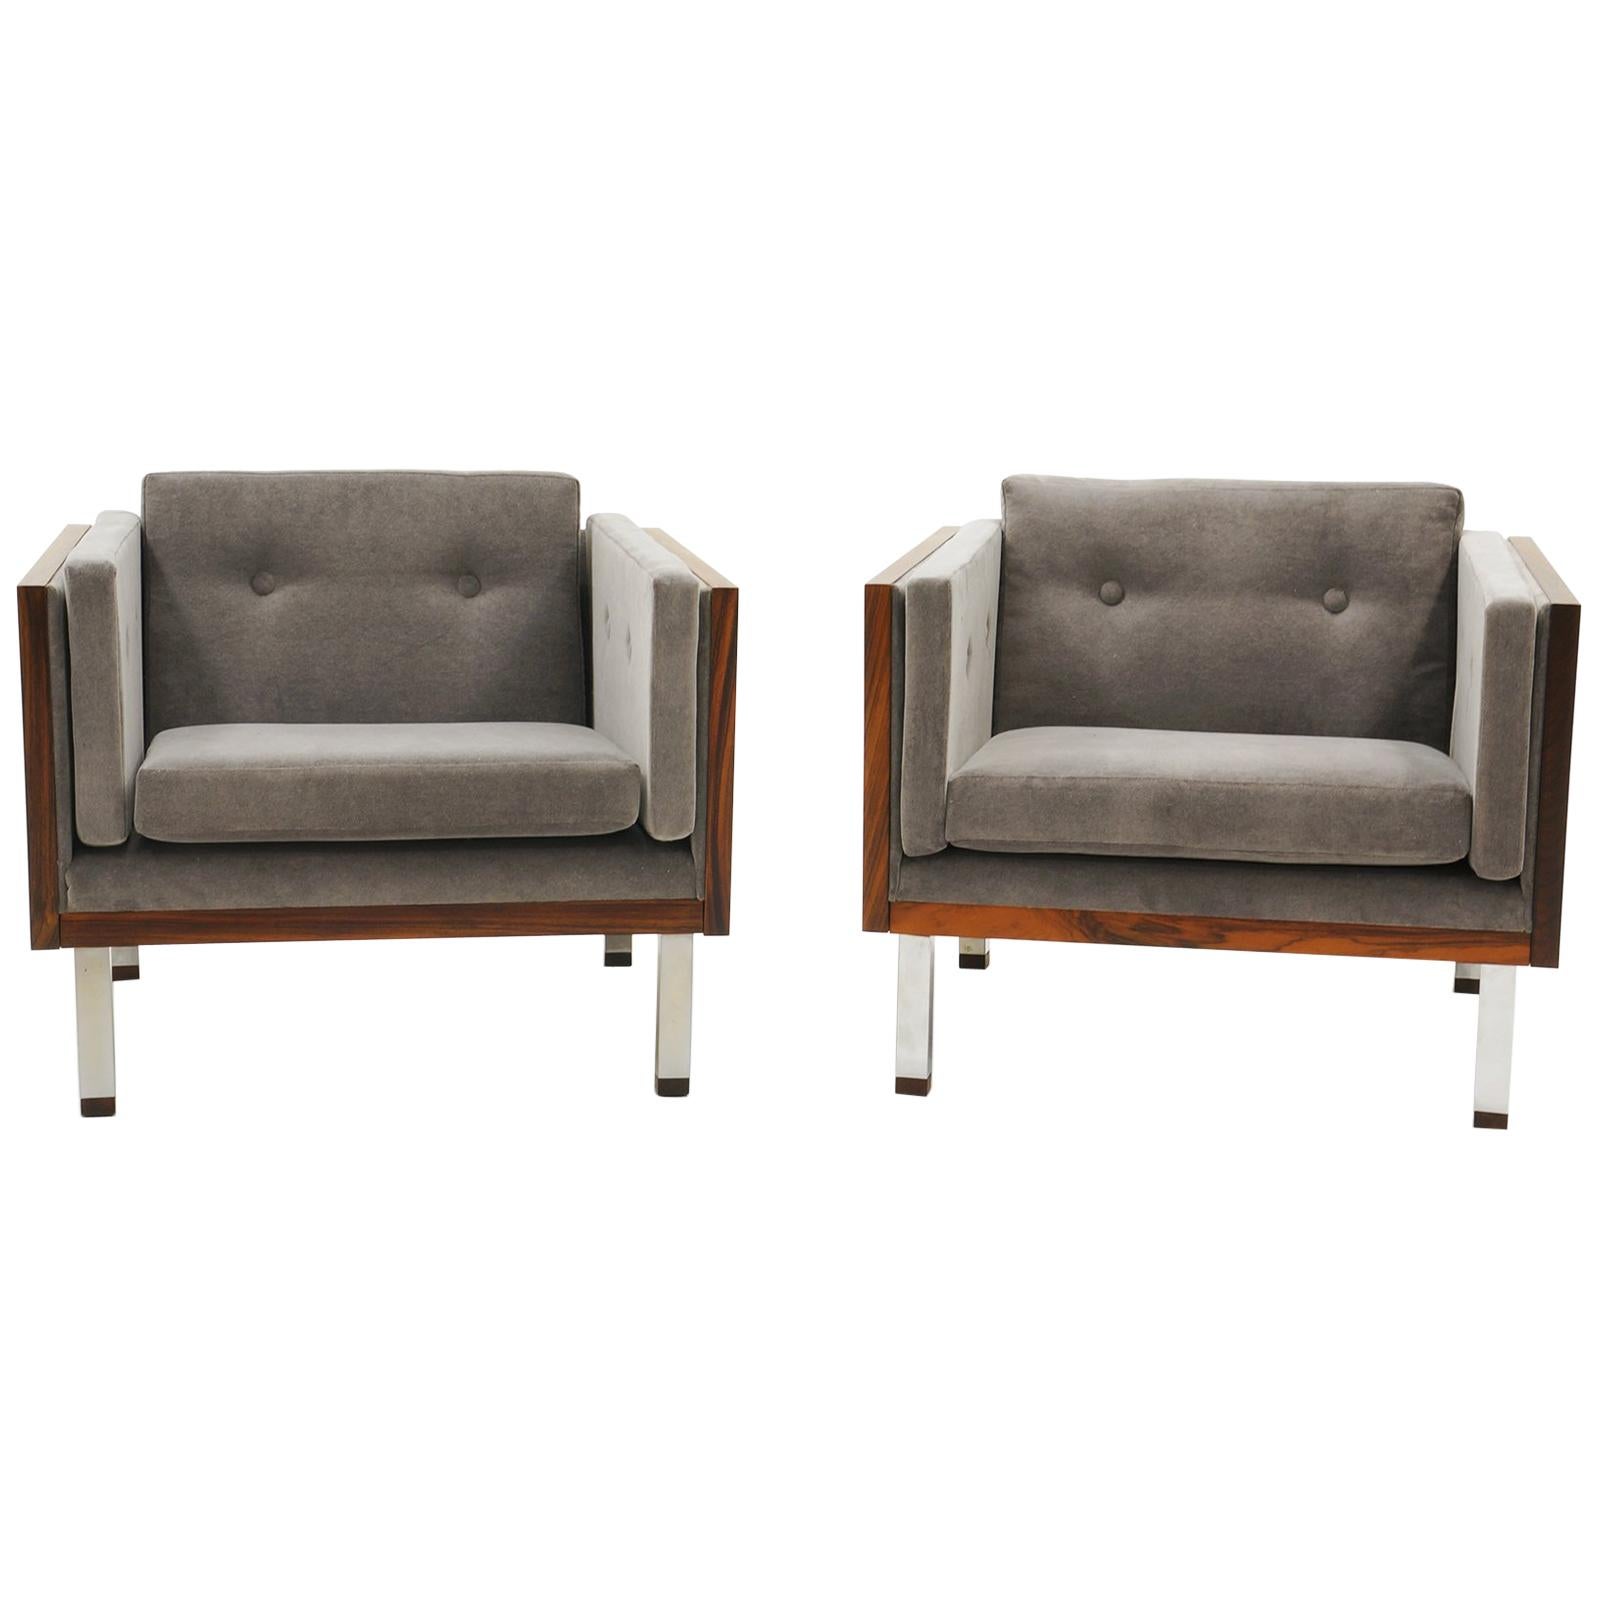 Pair of Lounge Chairs in Rosewood and Gray Velvet by Jydsk Møbelværk